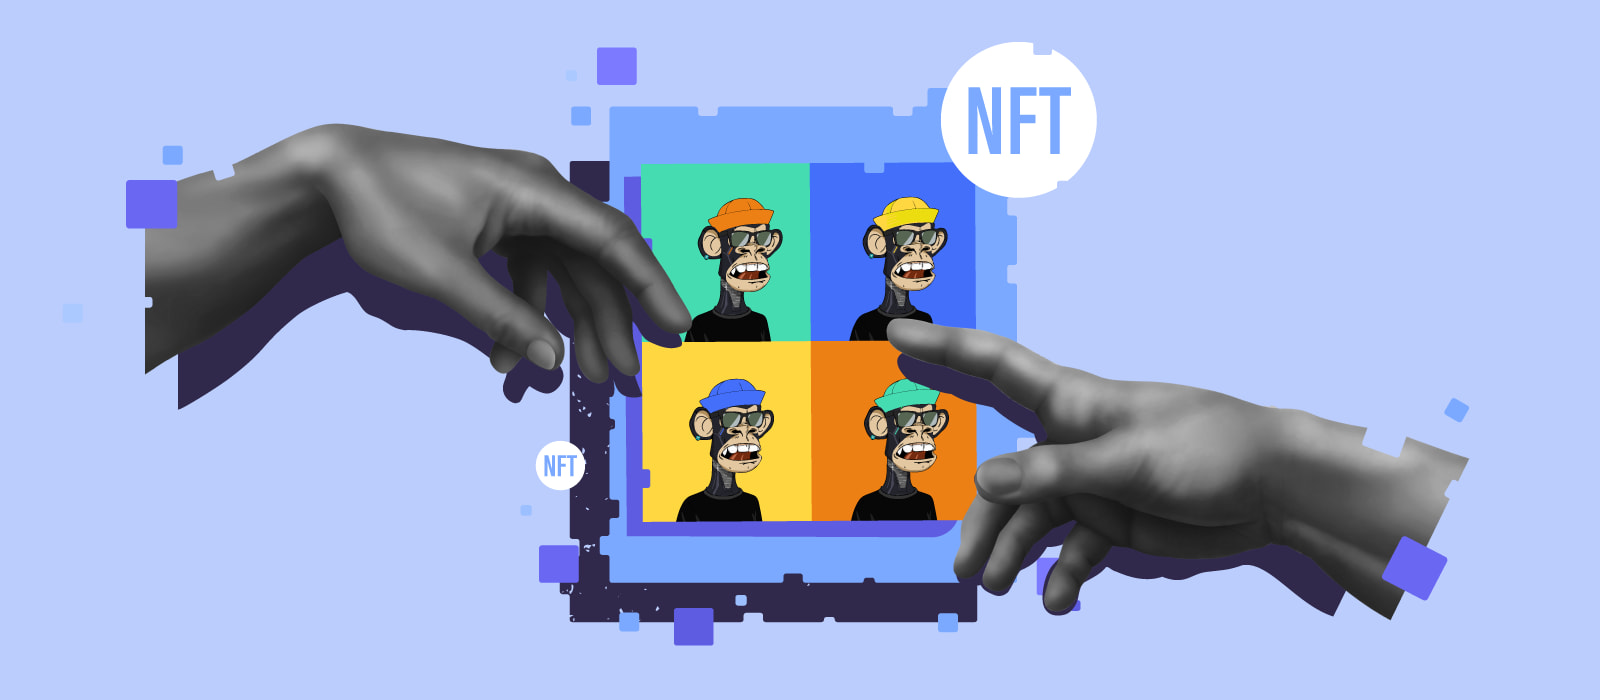 How to Create an NFT Marketplace: Step-by-Step Guide